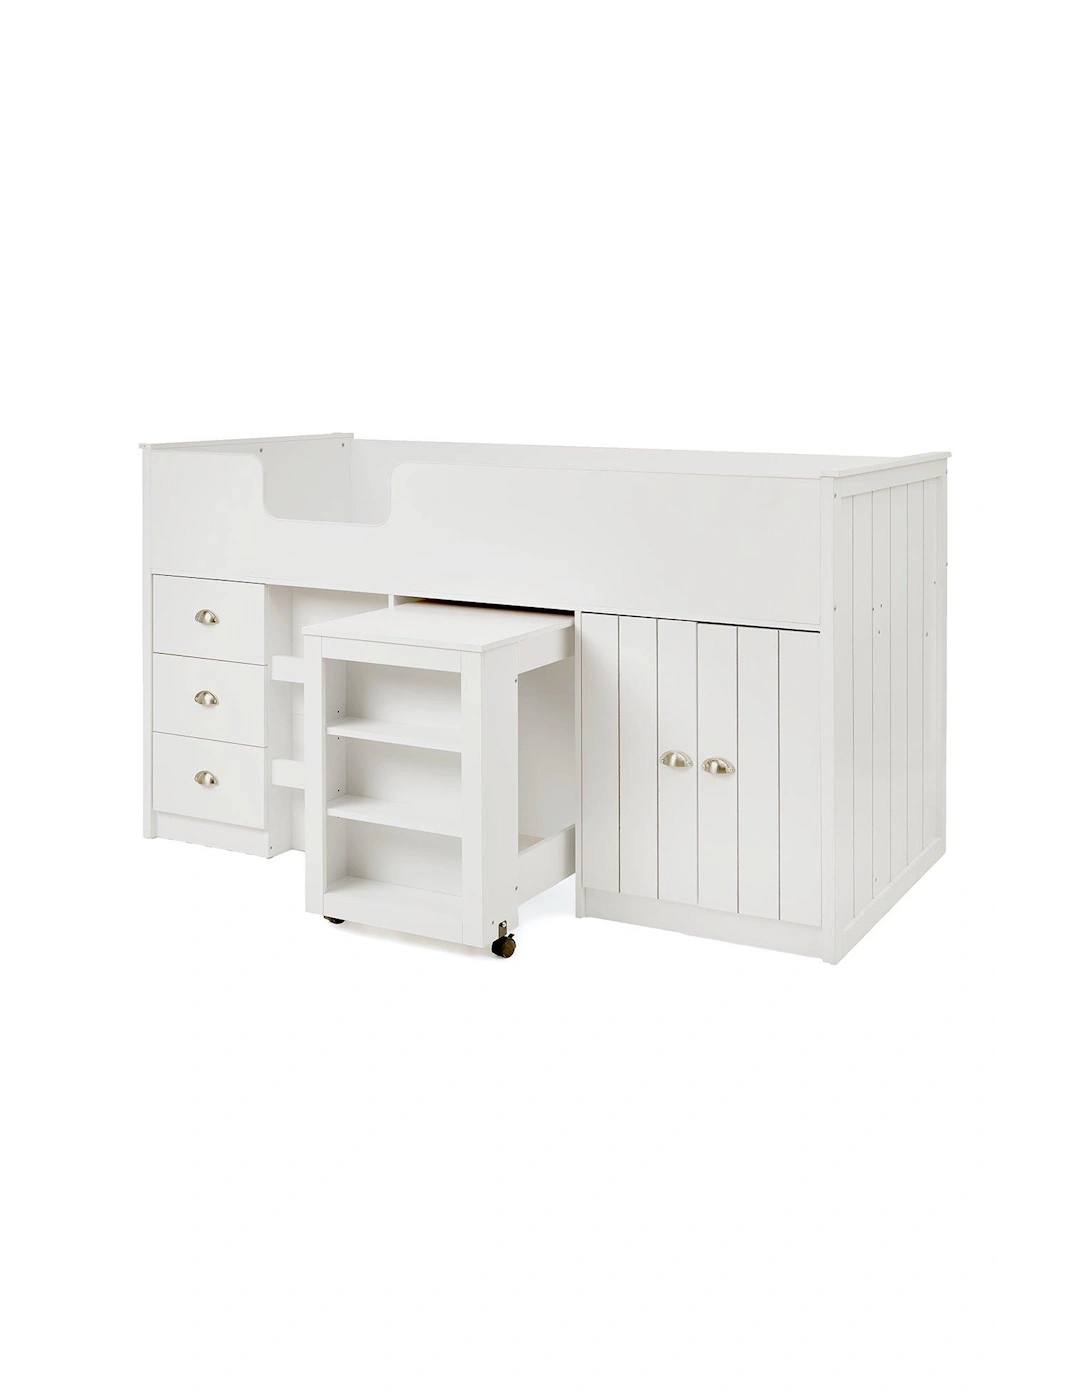 Atlanta Mid Sleeper Bed with Storage and Pull Out Desk - White